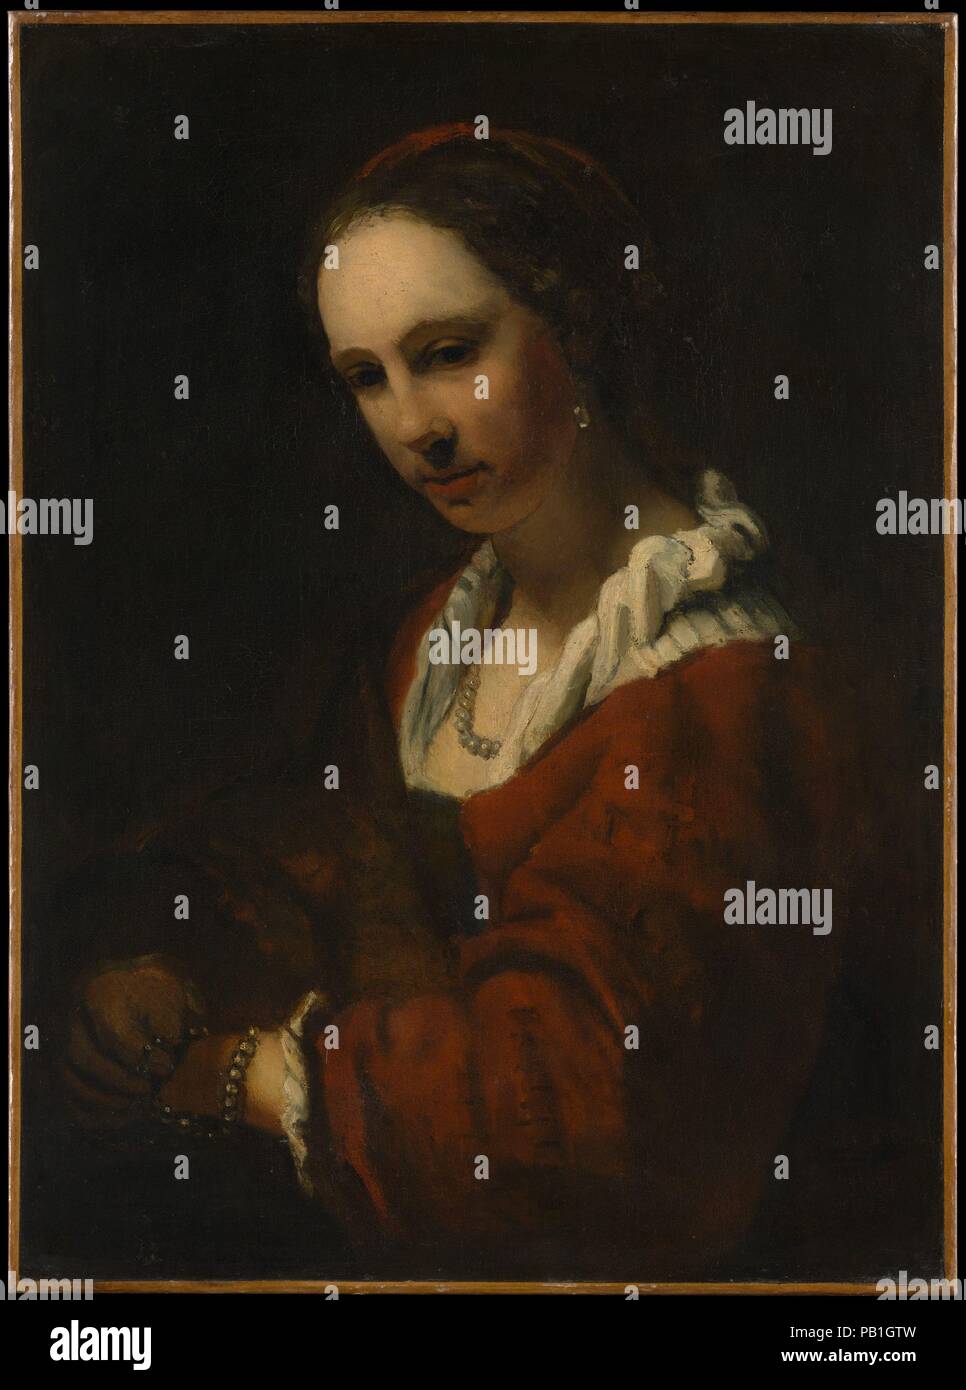 Young Woman with a Pearl Necklace. Artist: Copy after Willem Drost (Dutch, late 17th or early 18th century). Dimensions: 33 1/8 x 24 1/2 in. (84.1 x 62.2 cm).  The sitter bears a resemblance to Hendrickje Stoffels (born about  1625-26, died 1663), Rembrandt's common-law wife and the subject of a number of his portraits, one of which is in the Metropolitan. The picture is the work of a pupil of Rembrandt, and the strong light striking the face suggests that it may be by Barent Fabritius. Another version is in Dresden. Museum: Metropolitan Museum of Art, New York, USA. Stock Photo